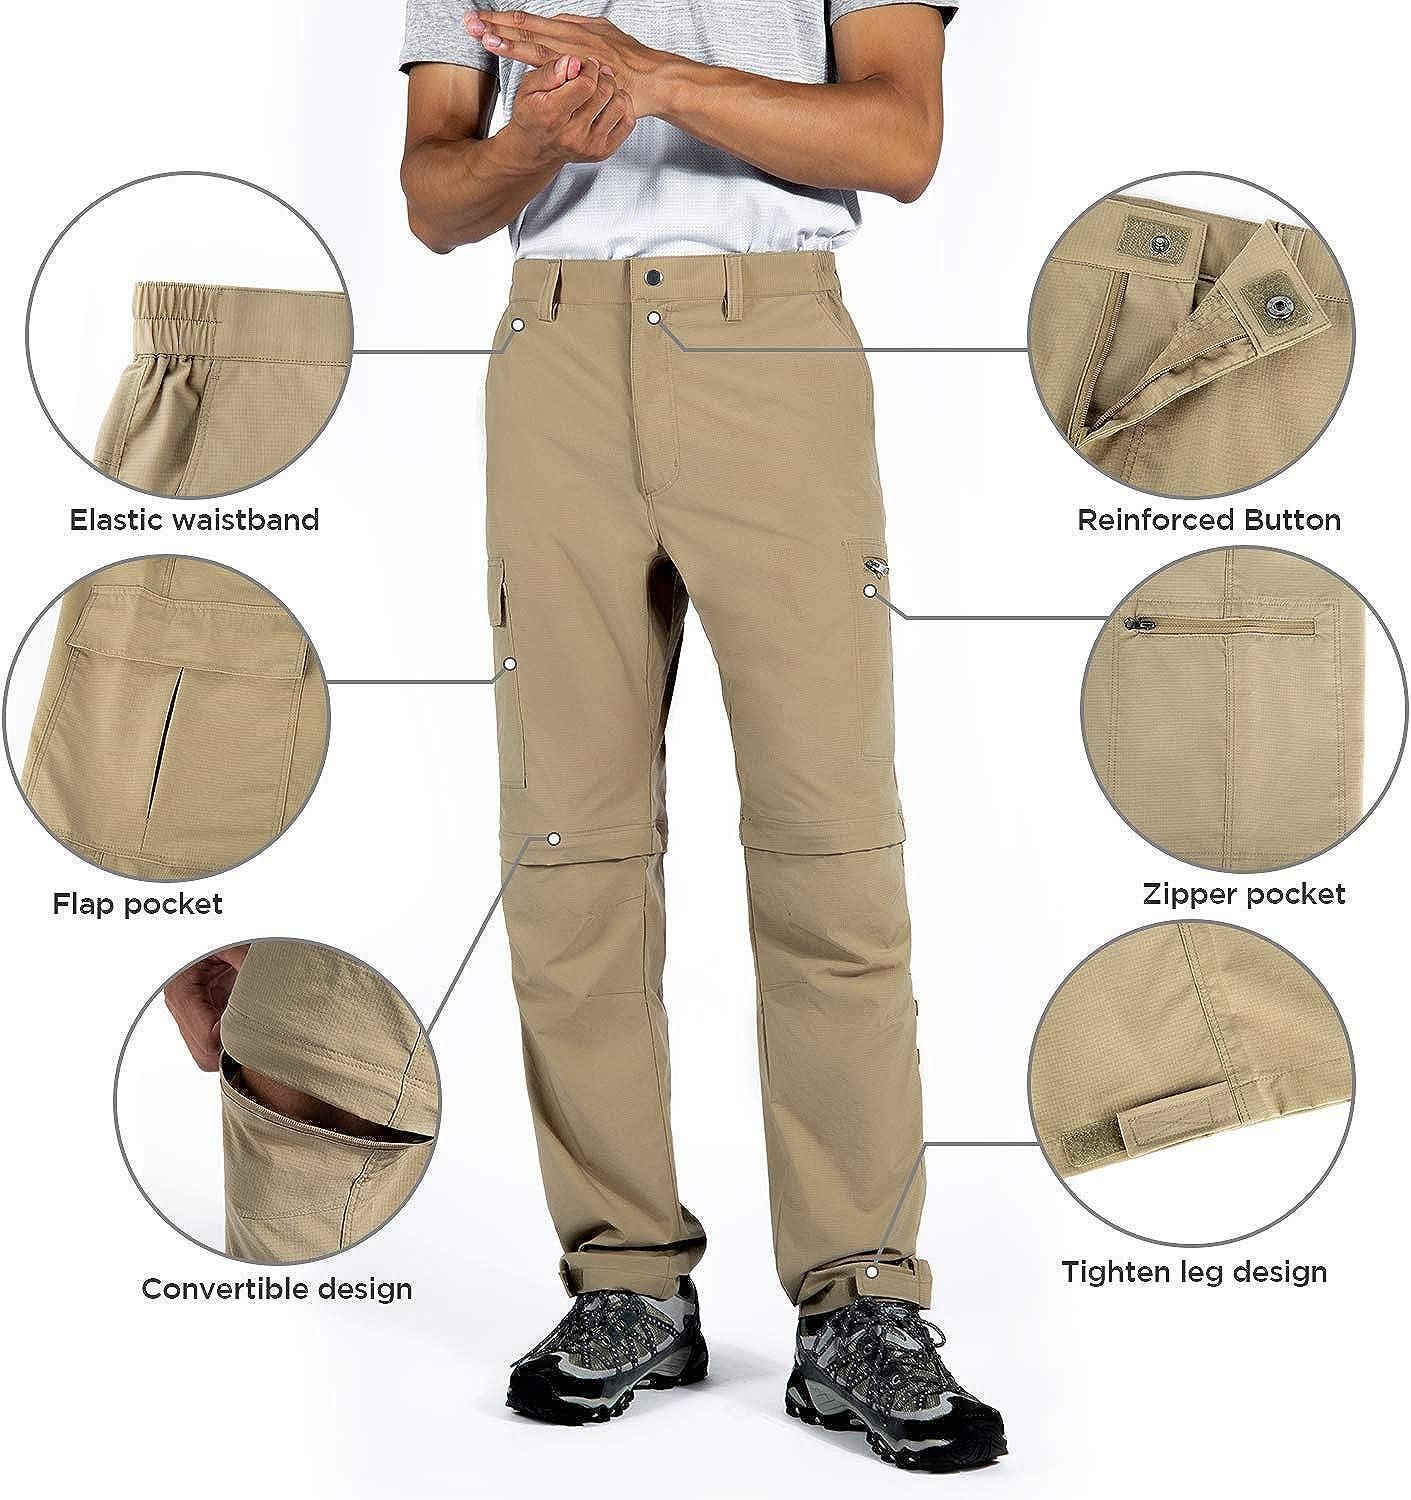 Wespornow Men's-Hiking-Cargo-Pants  Lightweight-Quick-Dry-Waterproof-Travel-Pants for Camping Hunting Fishing  Tactical